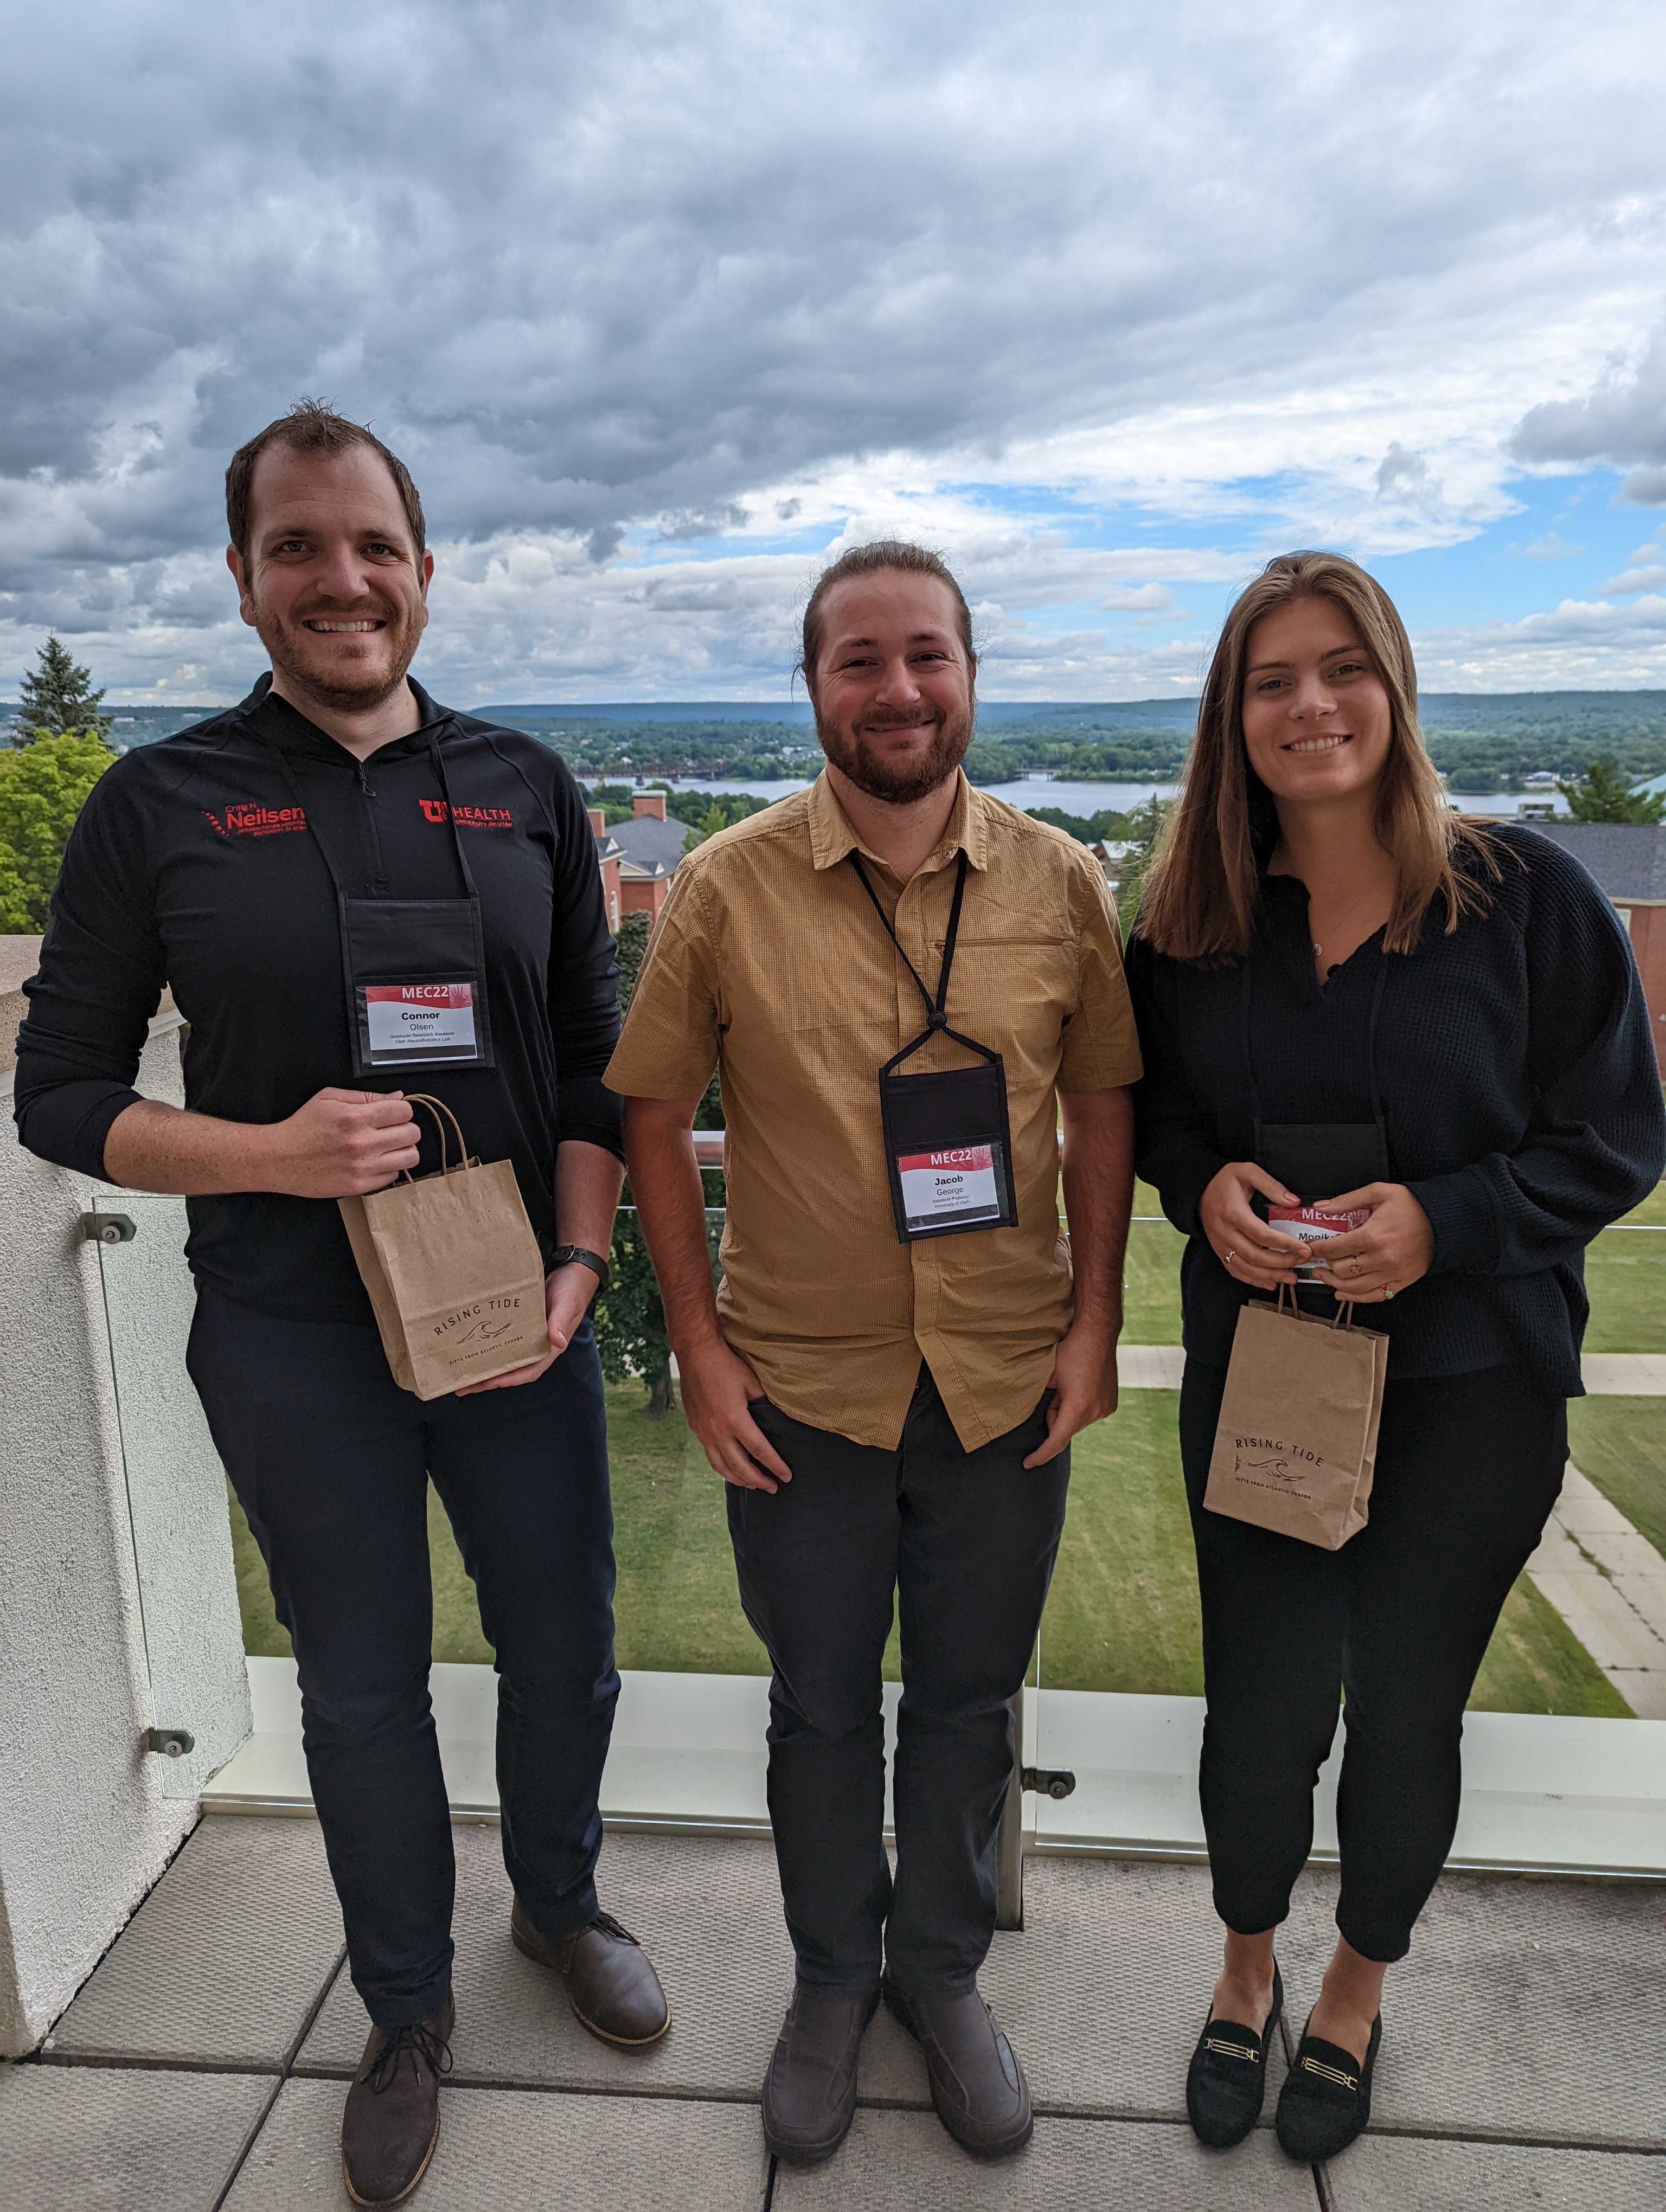 MEC 2022 Student Podium Presentation Competition award winners: Connor Olsen (Left) First Place, and Monika Buczak (right) second place, with their professor Jacob A. George in the center